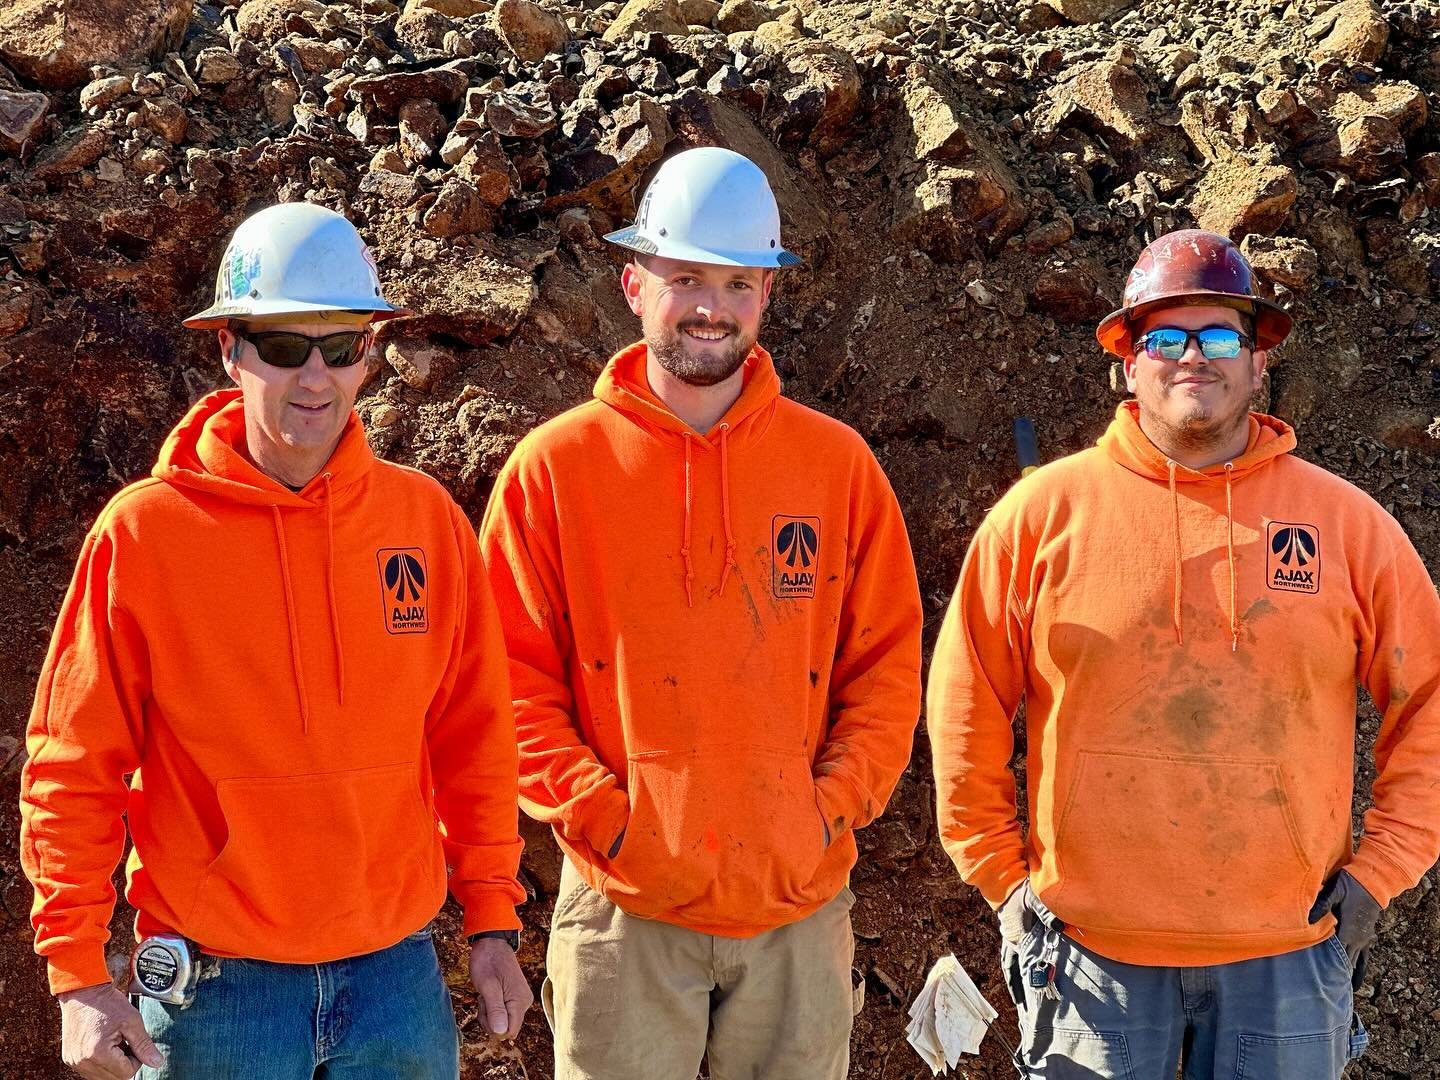 It&rsquo;s Meet the Team Monday! This hardworking crew is bringing some fun additions to Mosier as well as prepping a pretty sweet house site. Plus, if you&rsquo;re hanging out with Jayson, Tony, Randy and Sam you may just get a steak lunch!!